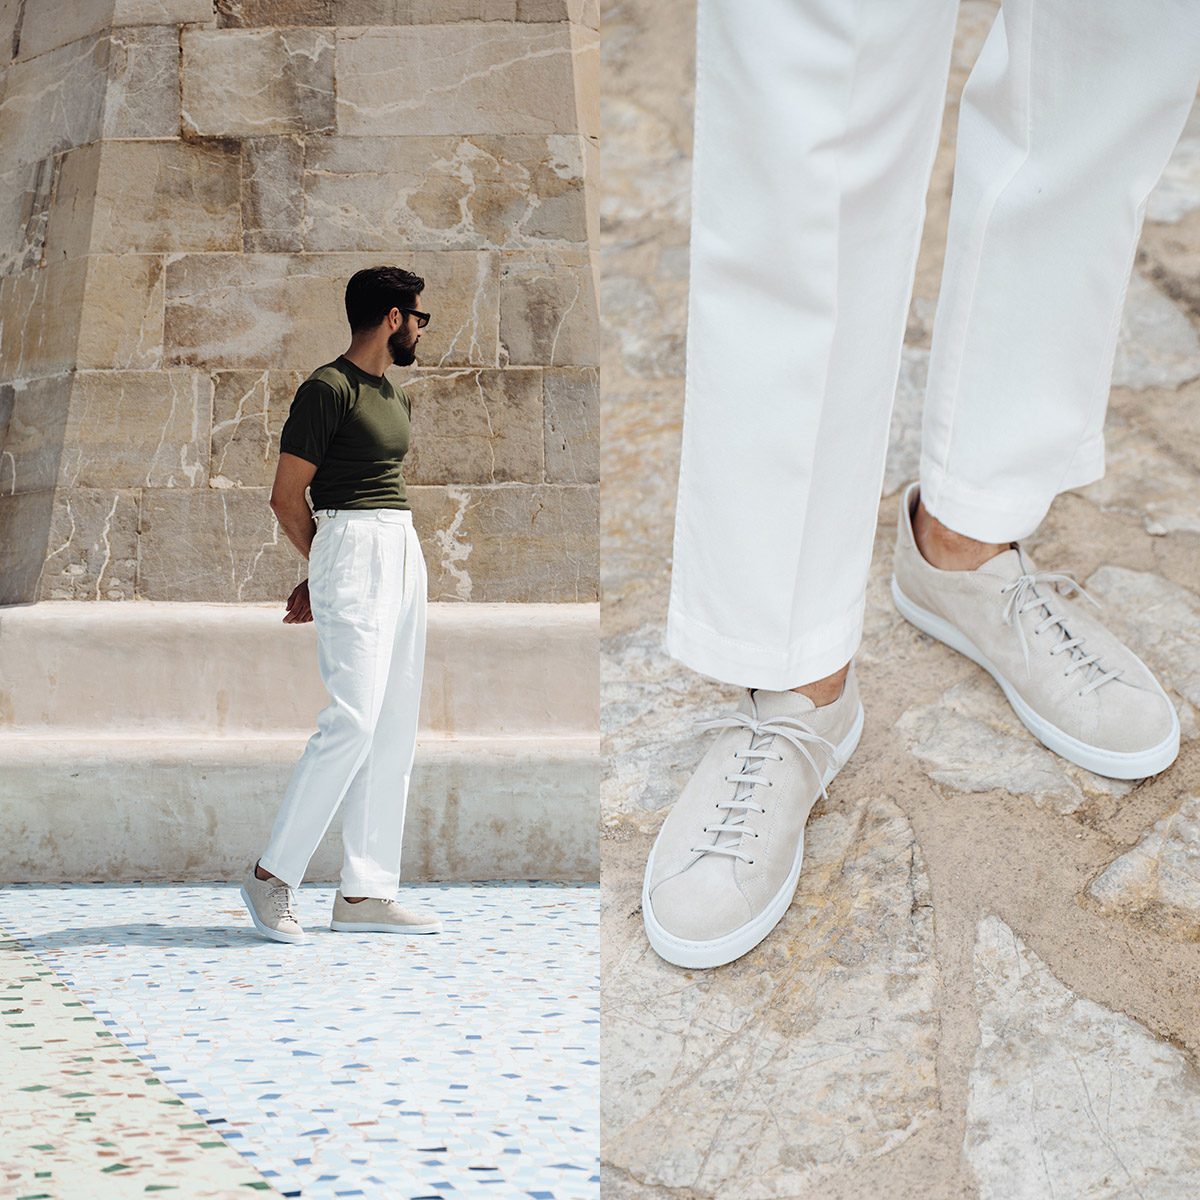 How to wear sneakers with jeans and formal trousers - MORJAS